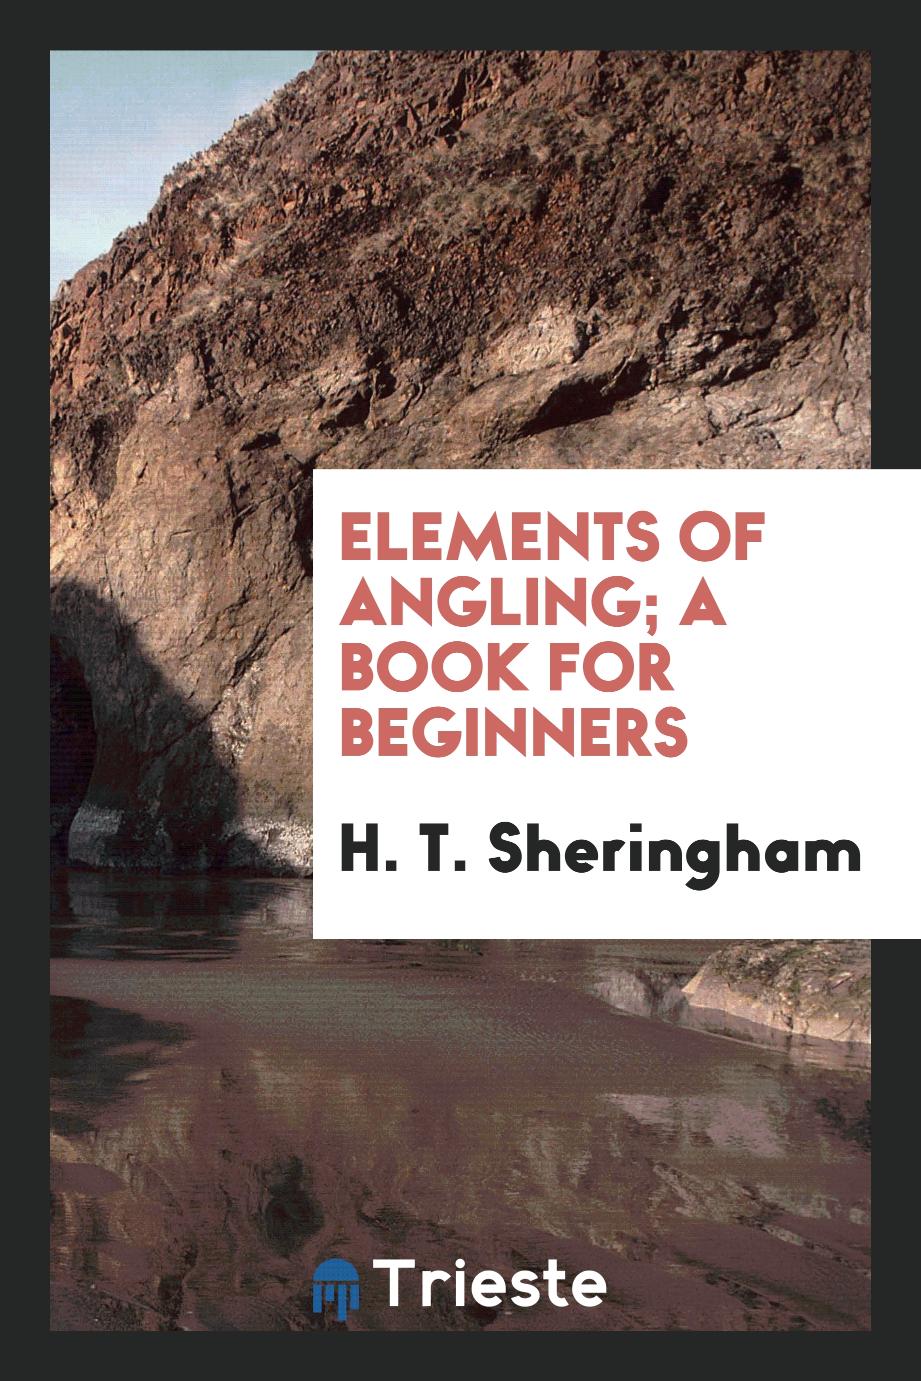 Elements of angling; a book for beginners